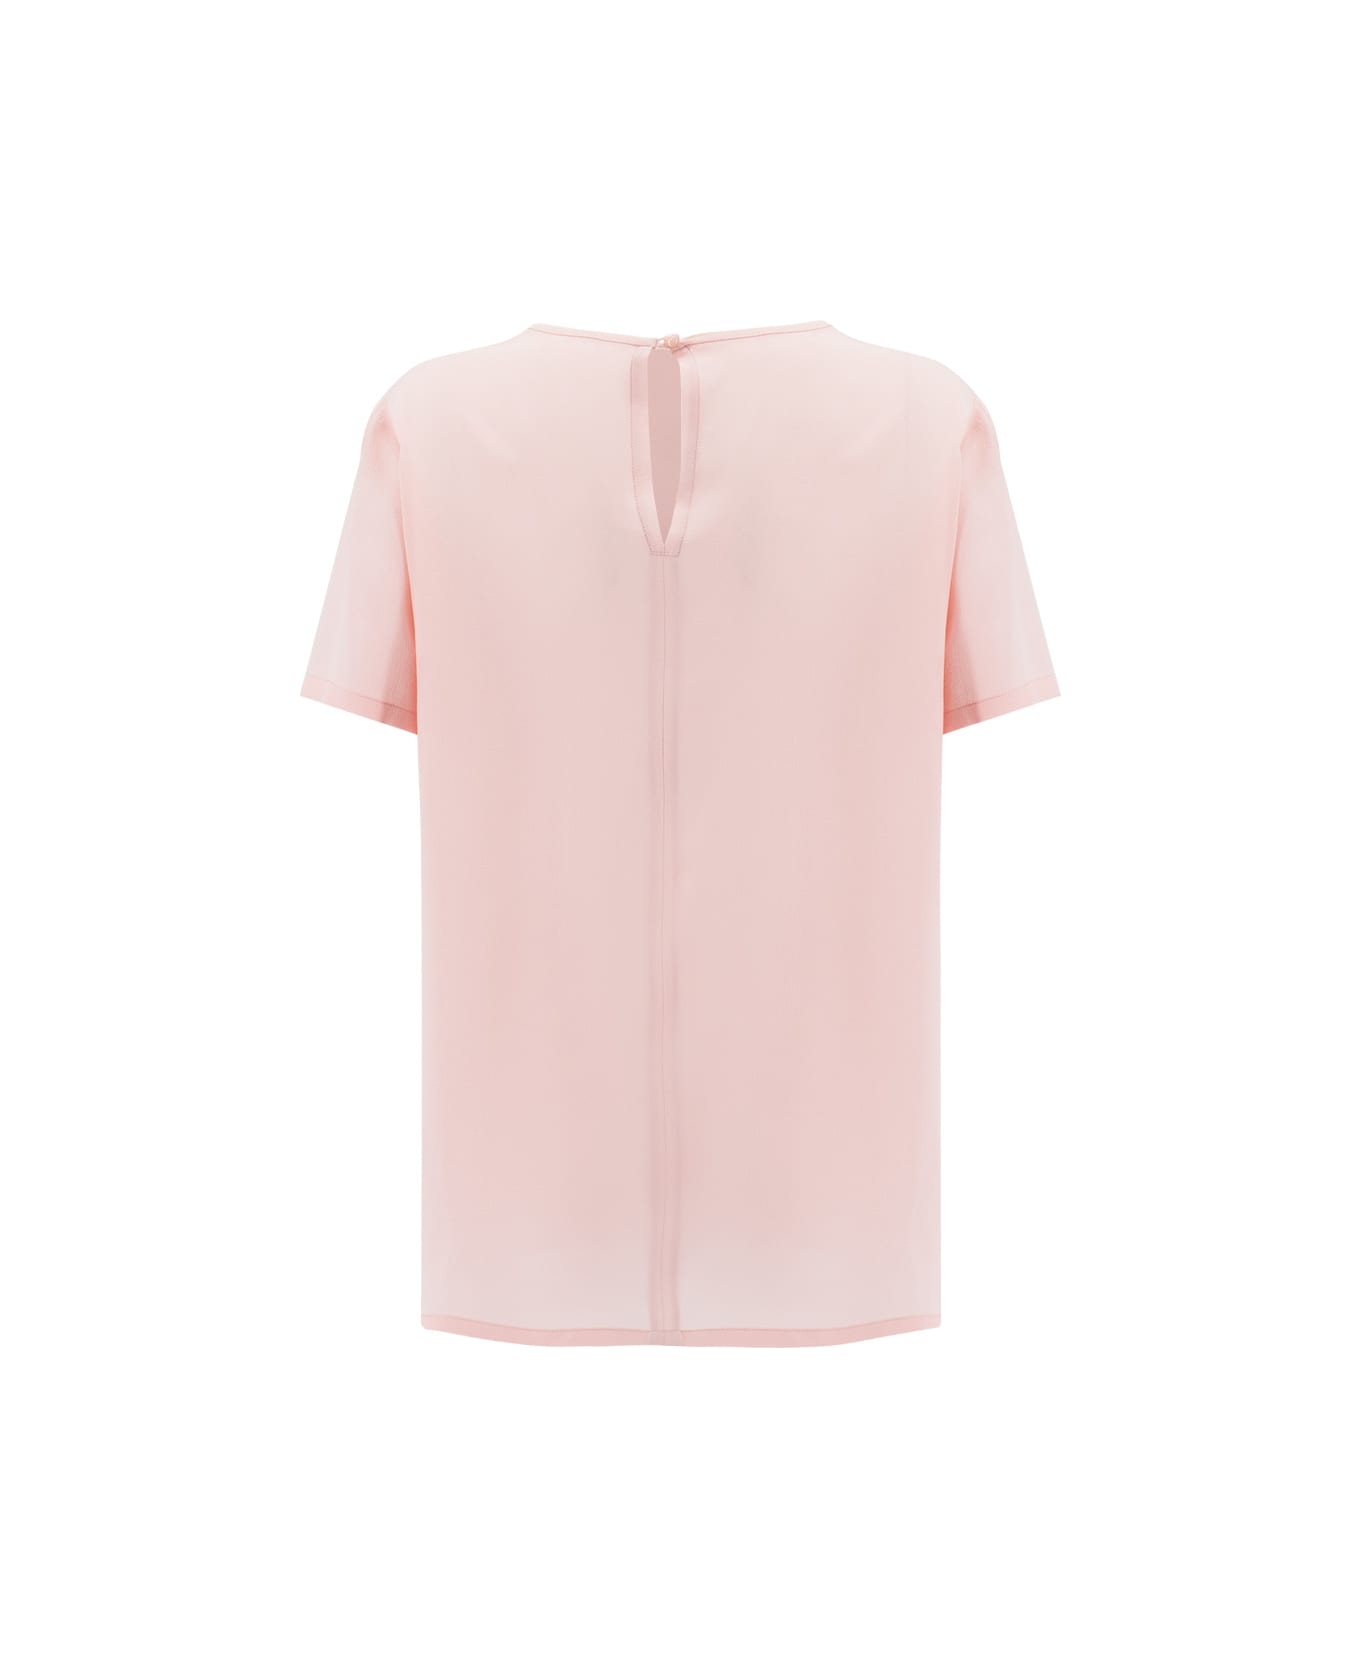 Etro Top - PINK Tシャツ